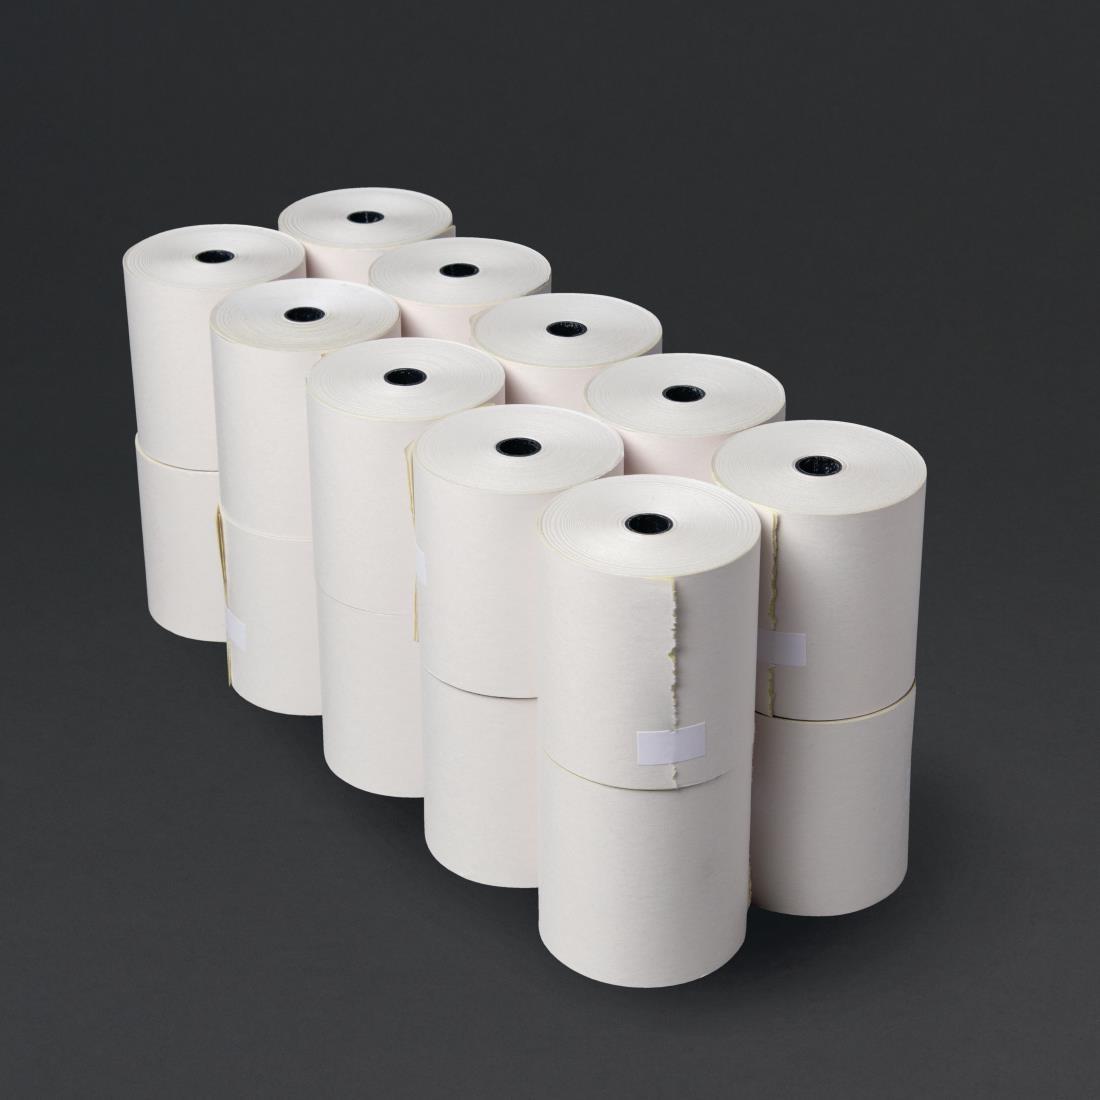 Fiesta Non-Thermal 2ply White and Yellow Till Roll 76 x 70mm (Pack of 20) - DK596  - 1